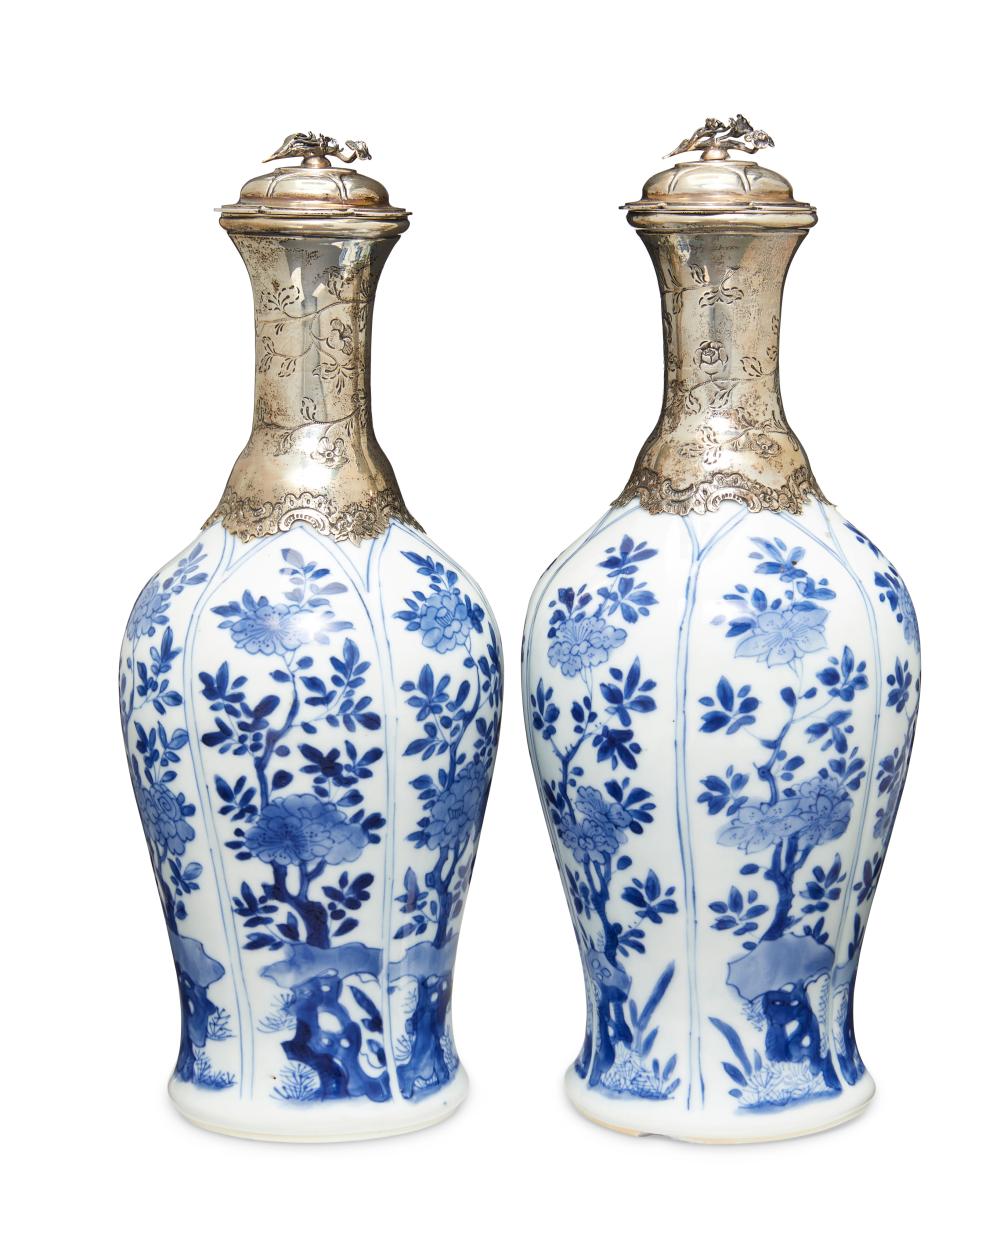 A PAIR OF CHINESE EXPORT DUTCH